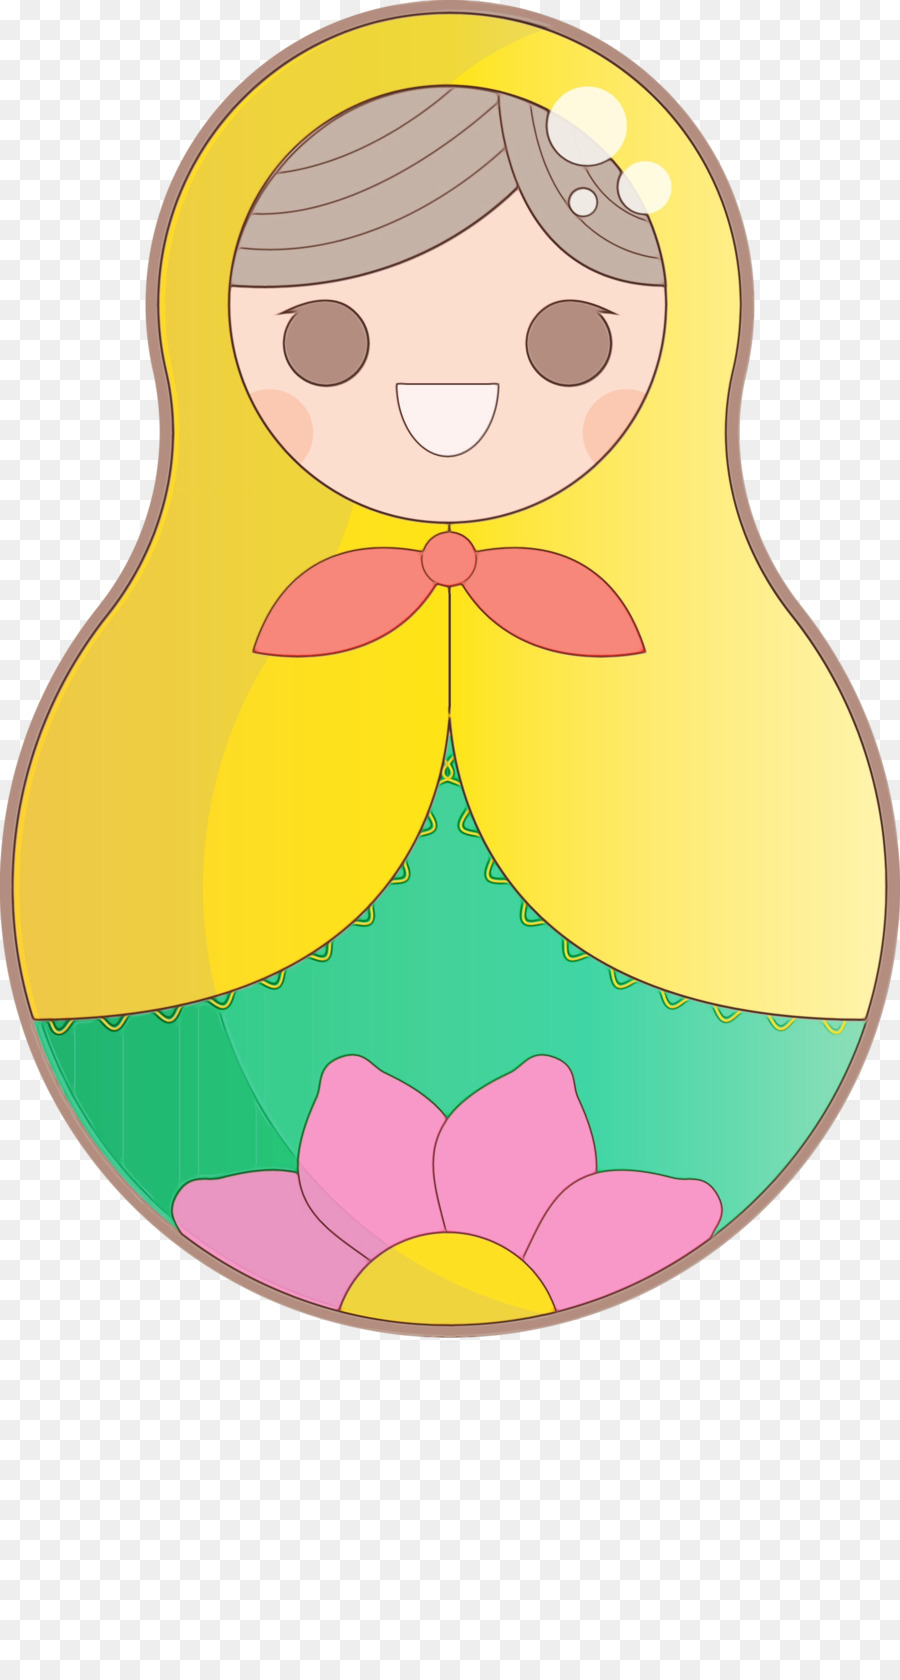 yellow character flower character created by